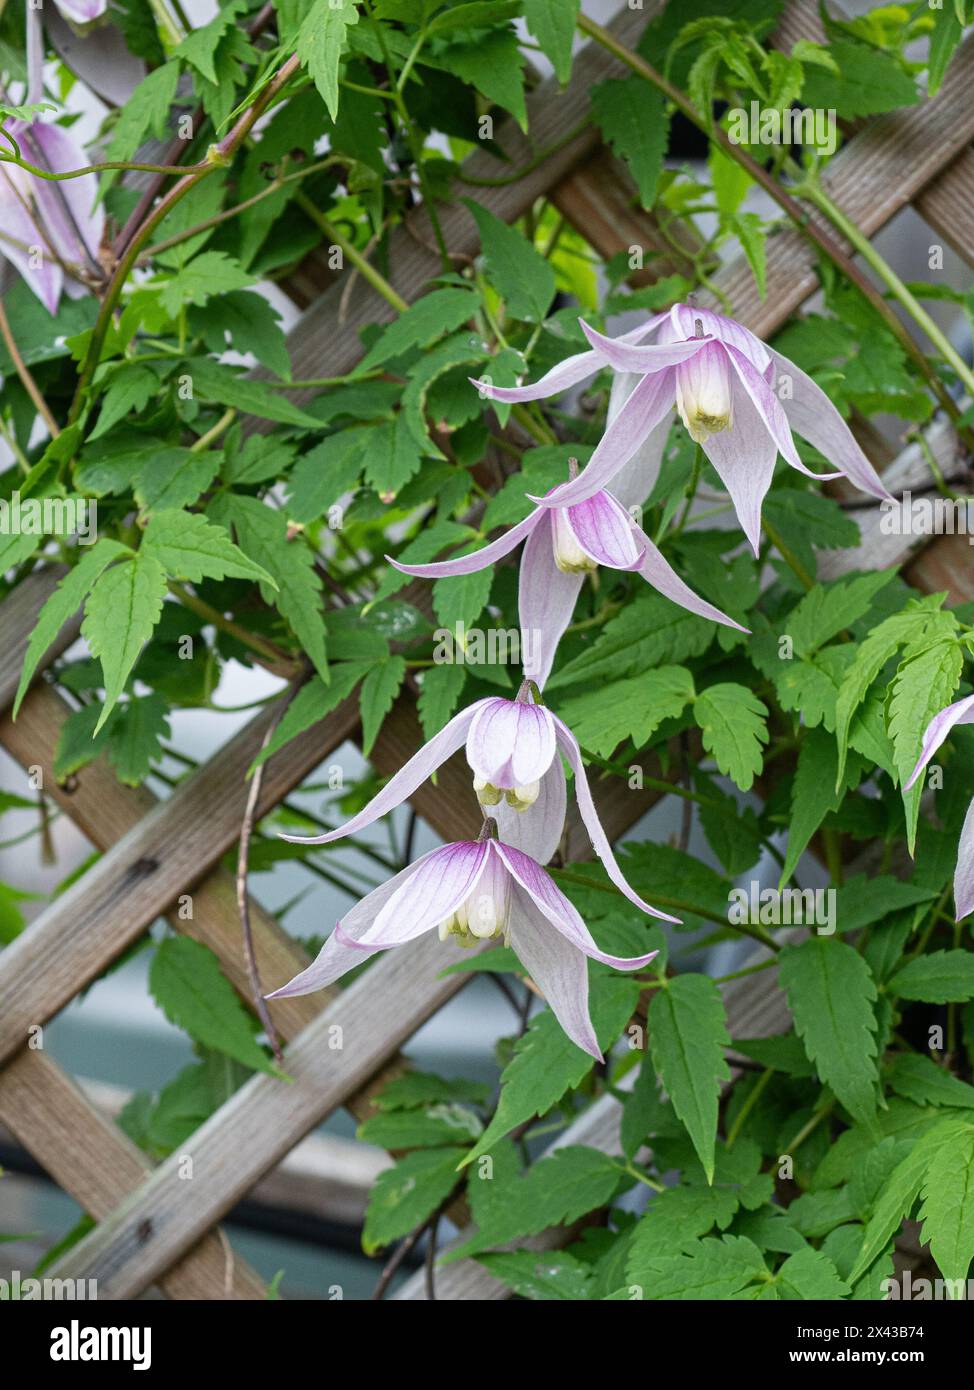 The early flowering climber Clematis alpina 'Willy' with its delicate pale pink flowers growing on a trellis. Stock Photo